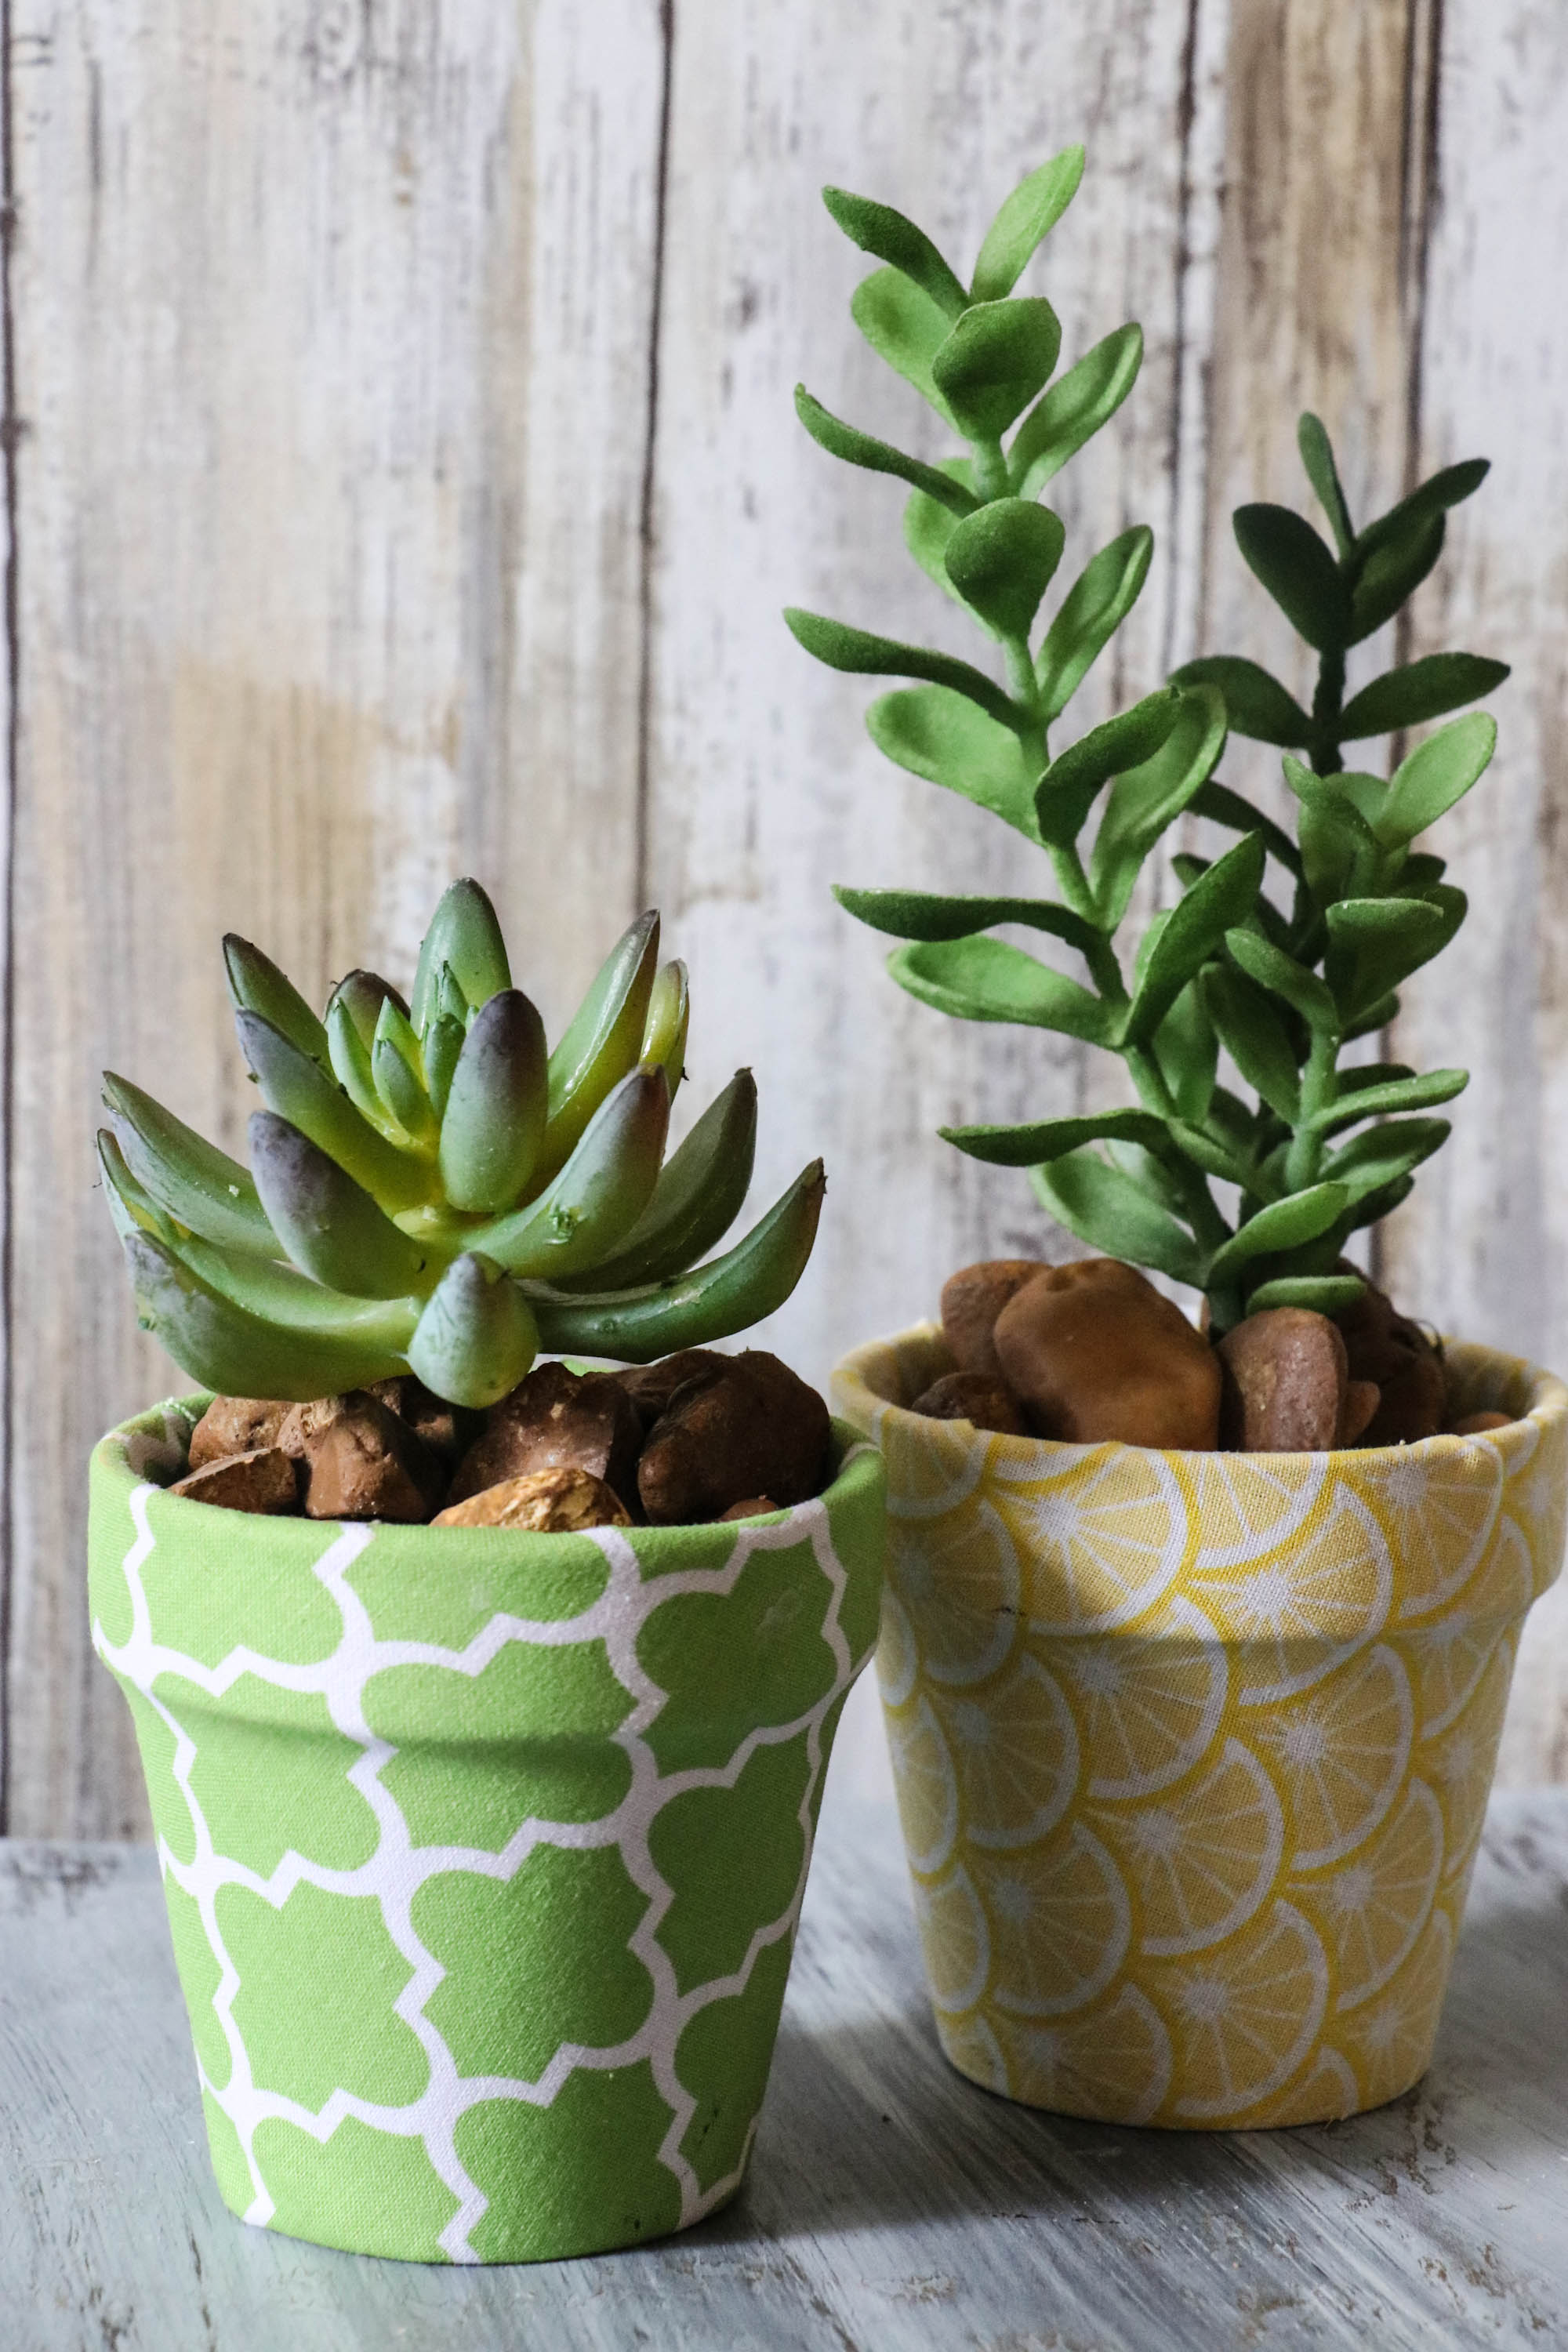 DIY Fabric Covered Flower Pots with Dollar Store Materials - Re-Fabbed